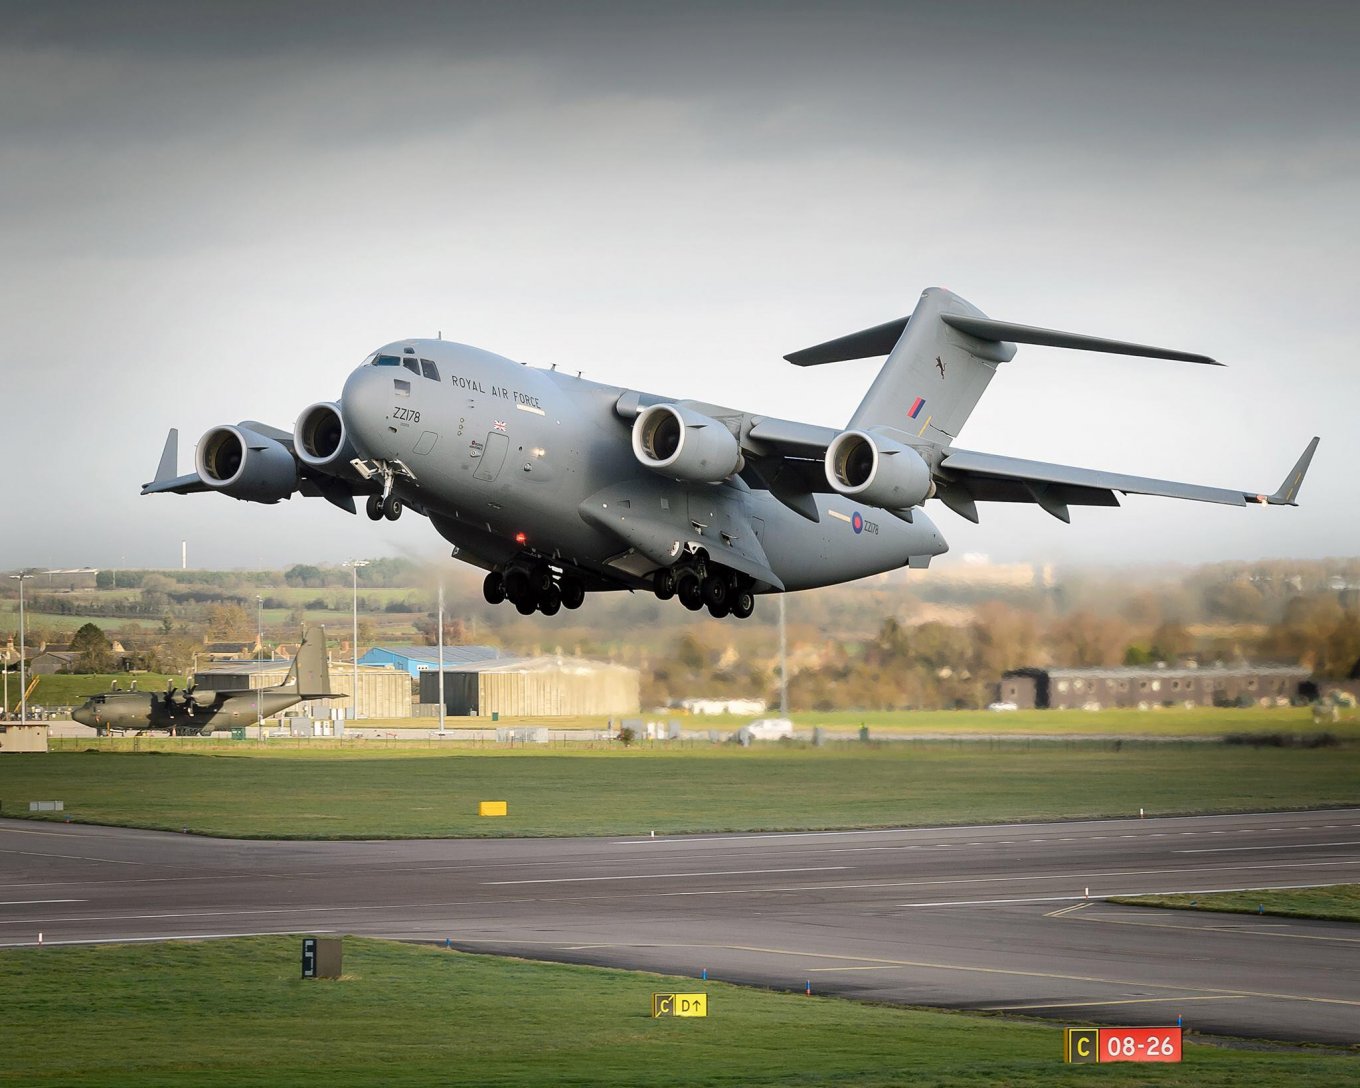 C-17 of the Royal Air Force of the United Kingdom